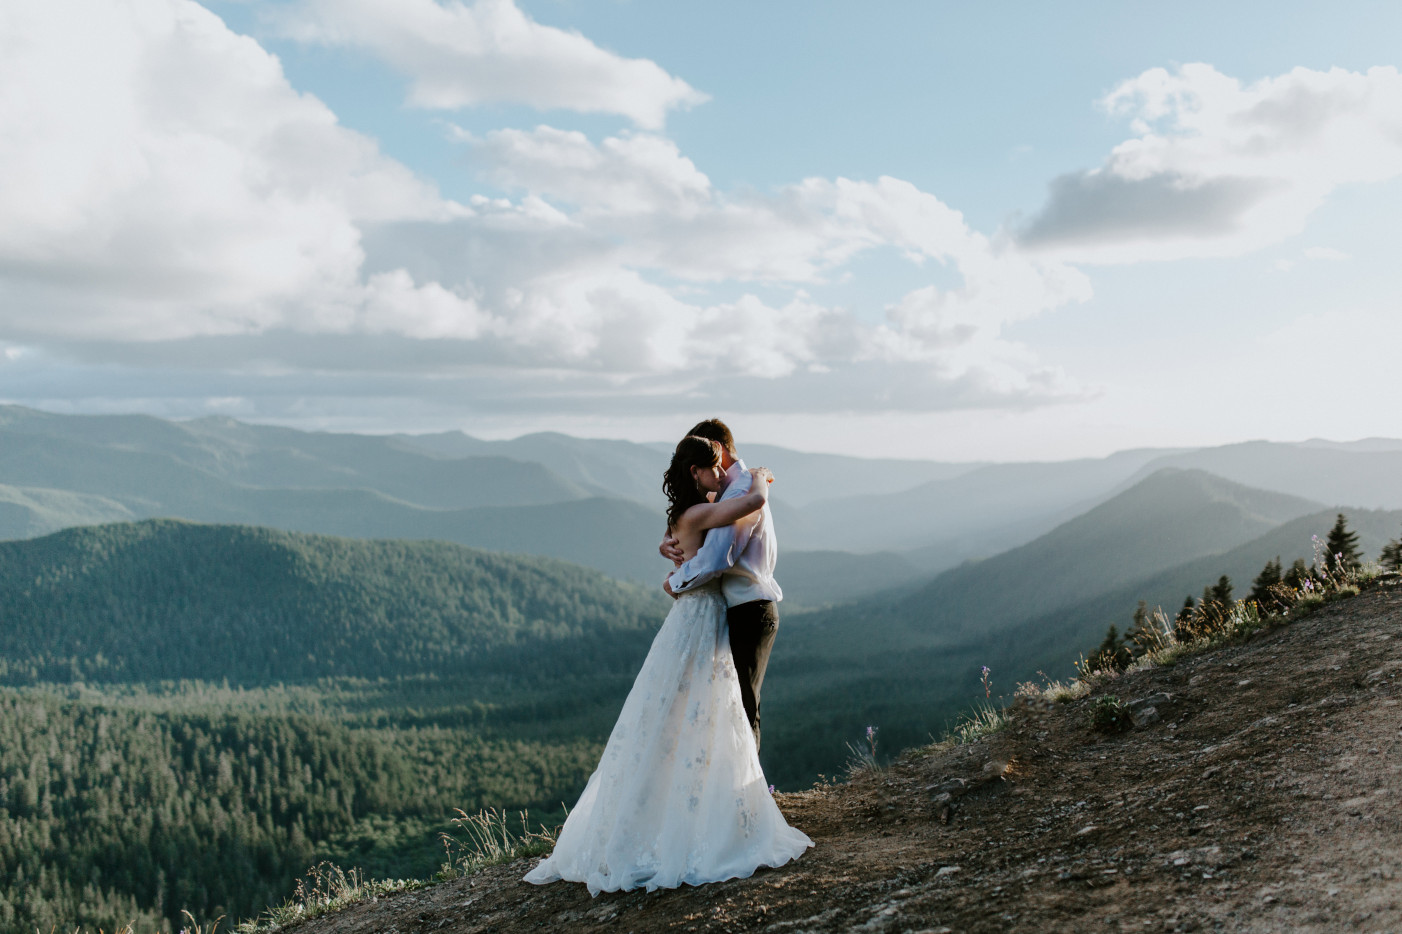 Moira and Ryan stand near a cliff with the view of the mountains in the background. Adventure elopement wedding shoot by Sienna Plus Josh.